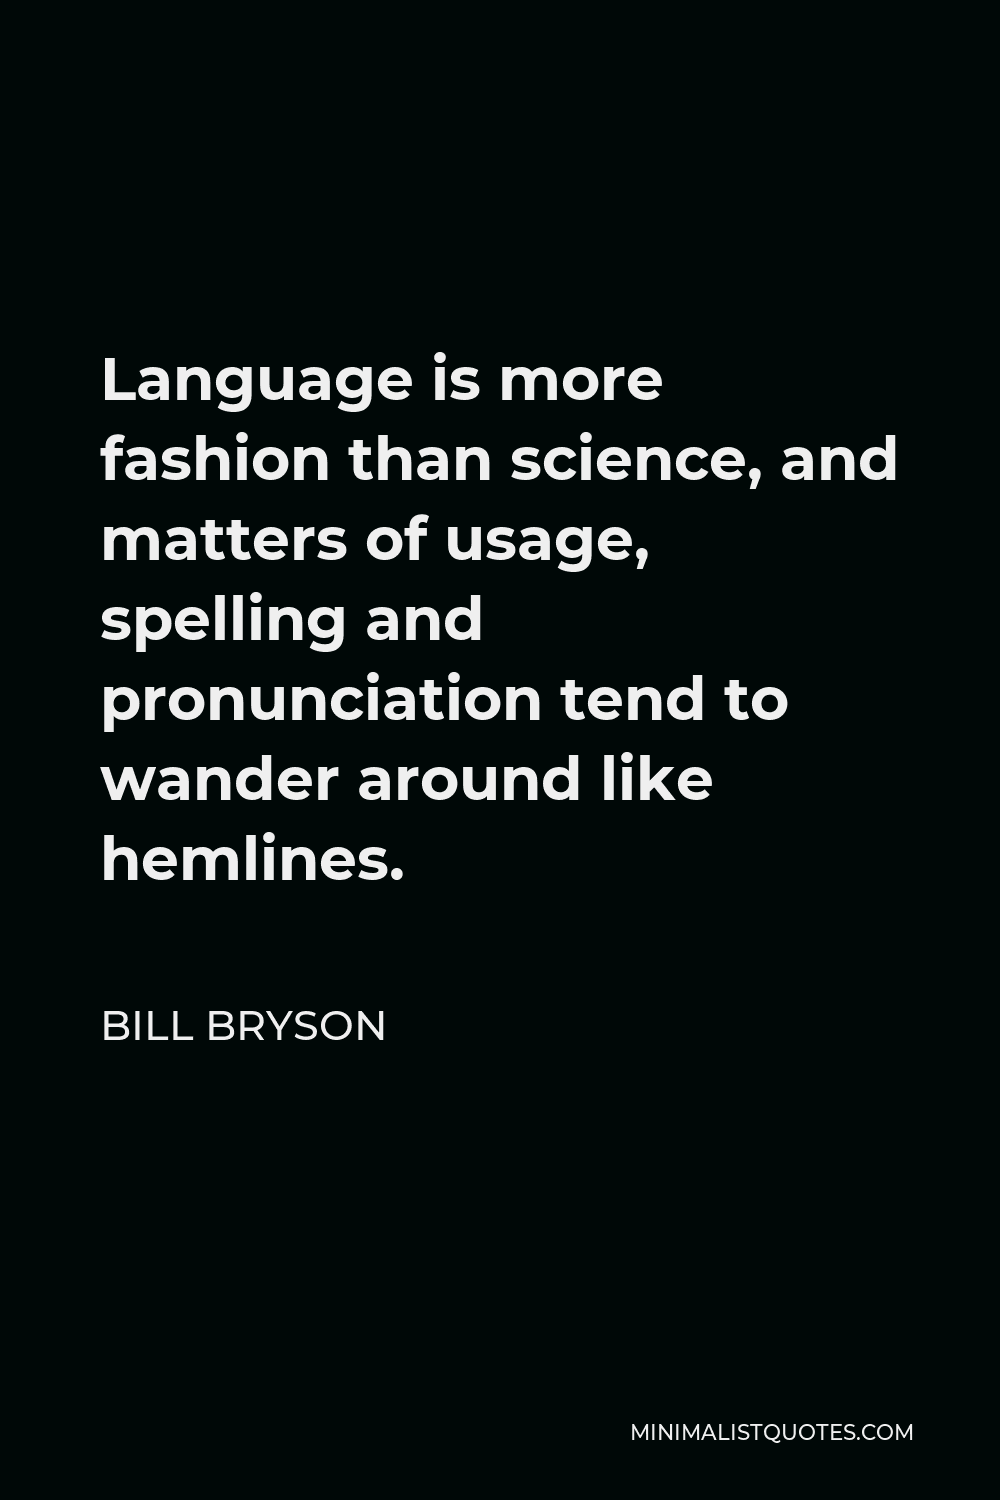 Bill Bryson Quote - Language is more fashion than science, and matters of usage, spelling and pronunciation tend to wander around like hemlines.